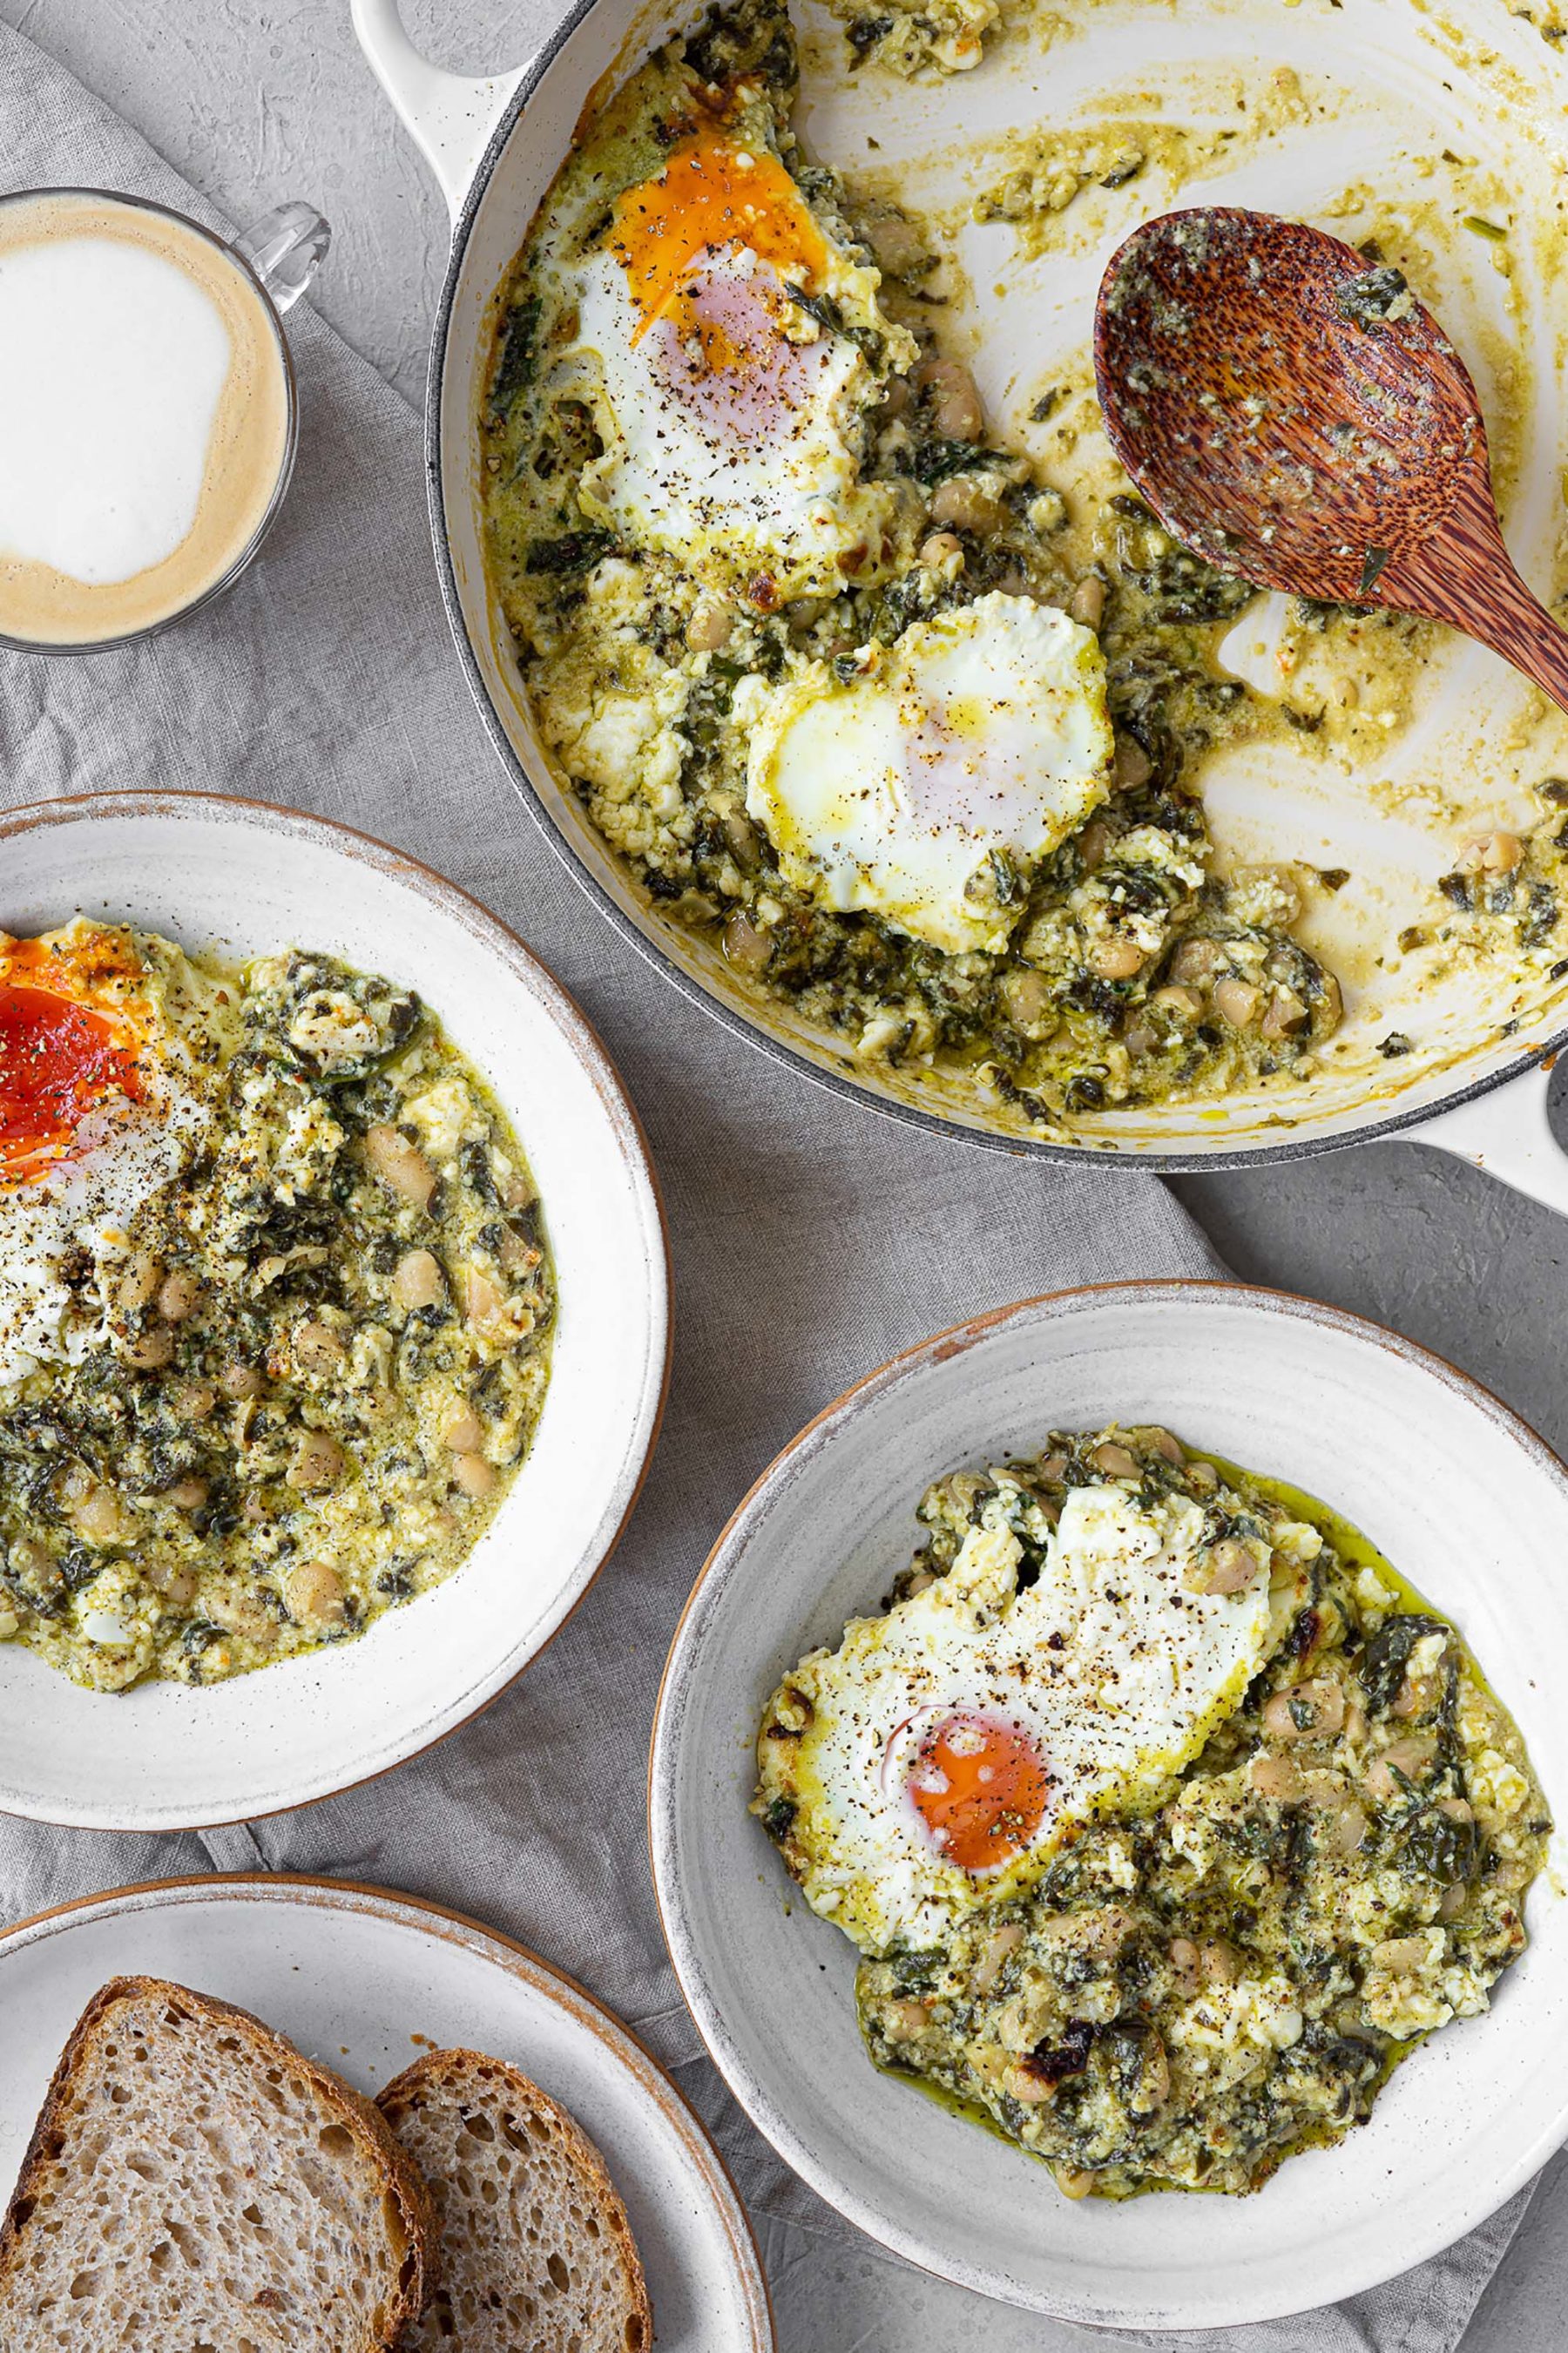 Baked Green Eggs - Another Pantry